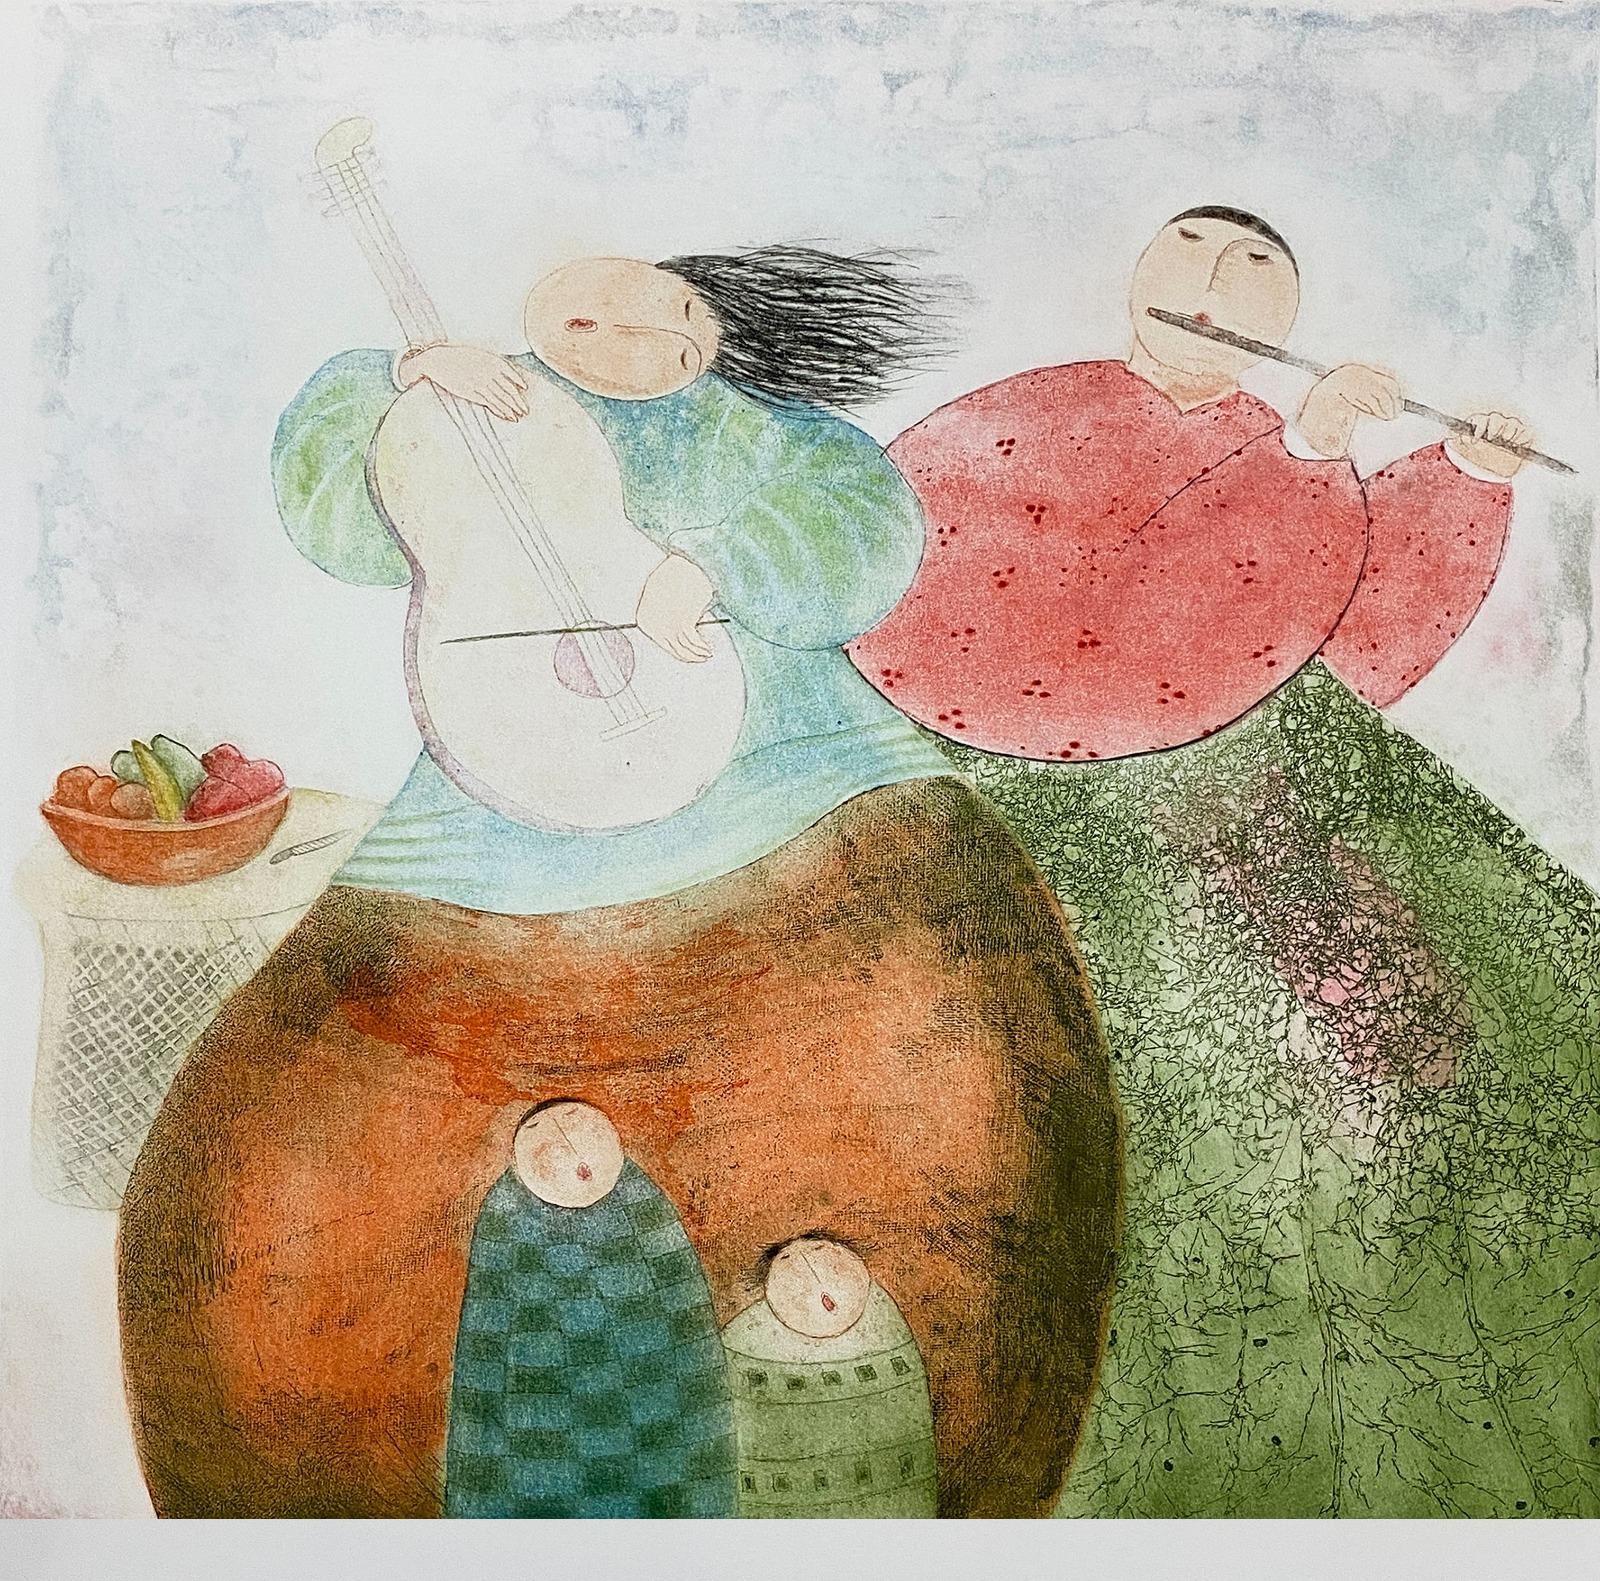 Eng Tay Portrait Painting - Spring Melody, Malaysian Asian Contemporary, Limited Edition, Drypoint Etching